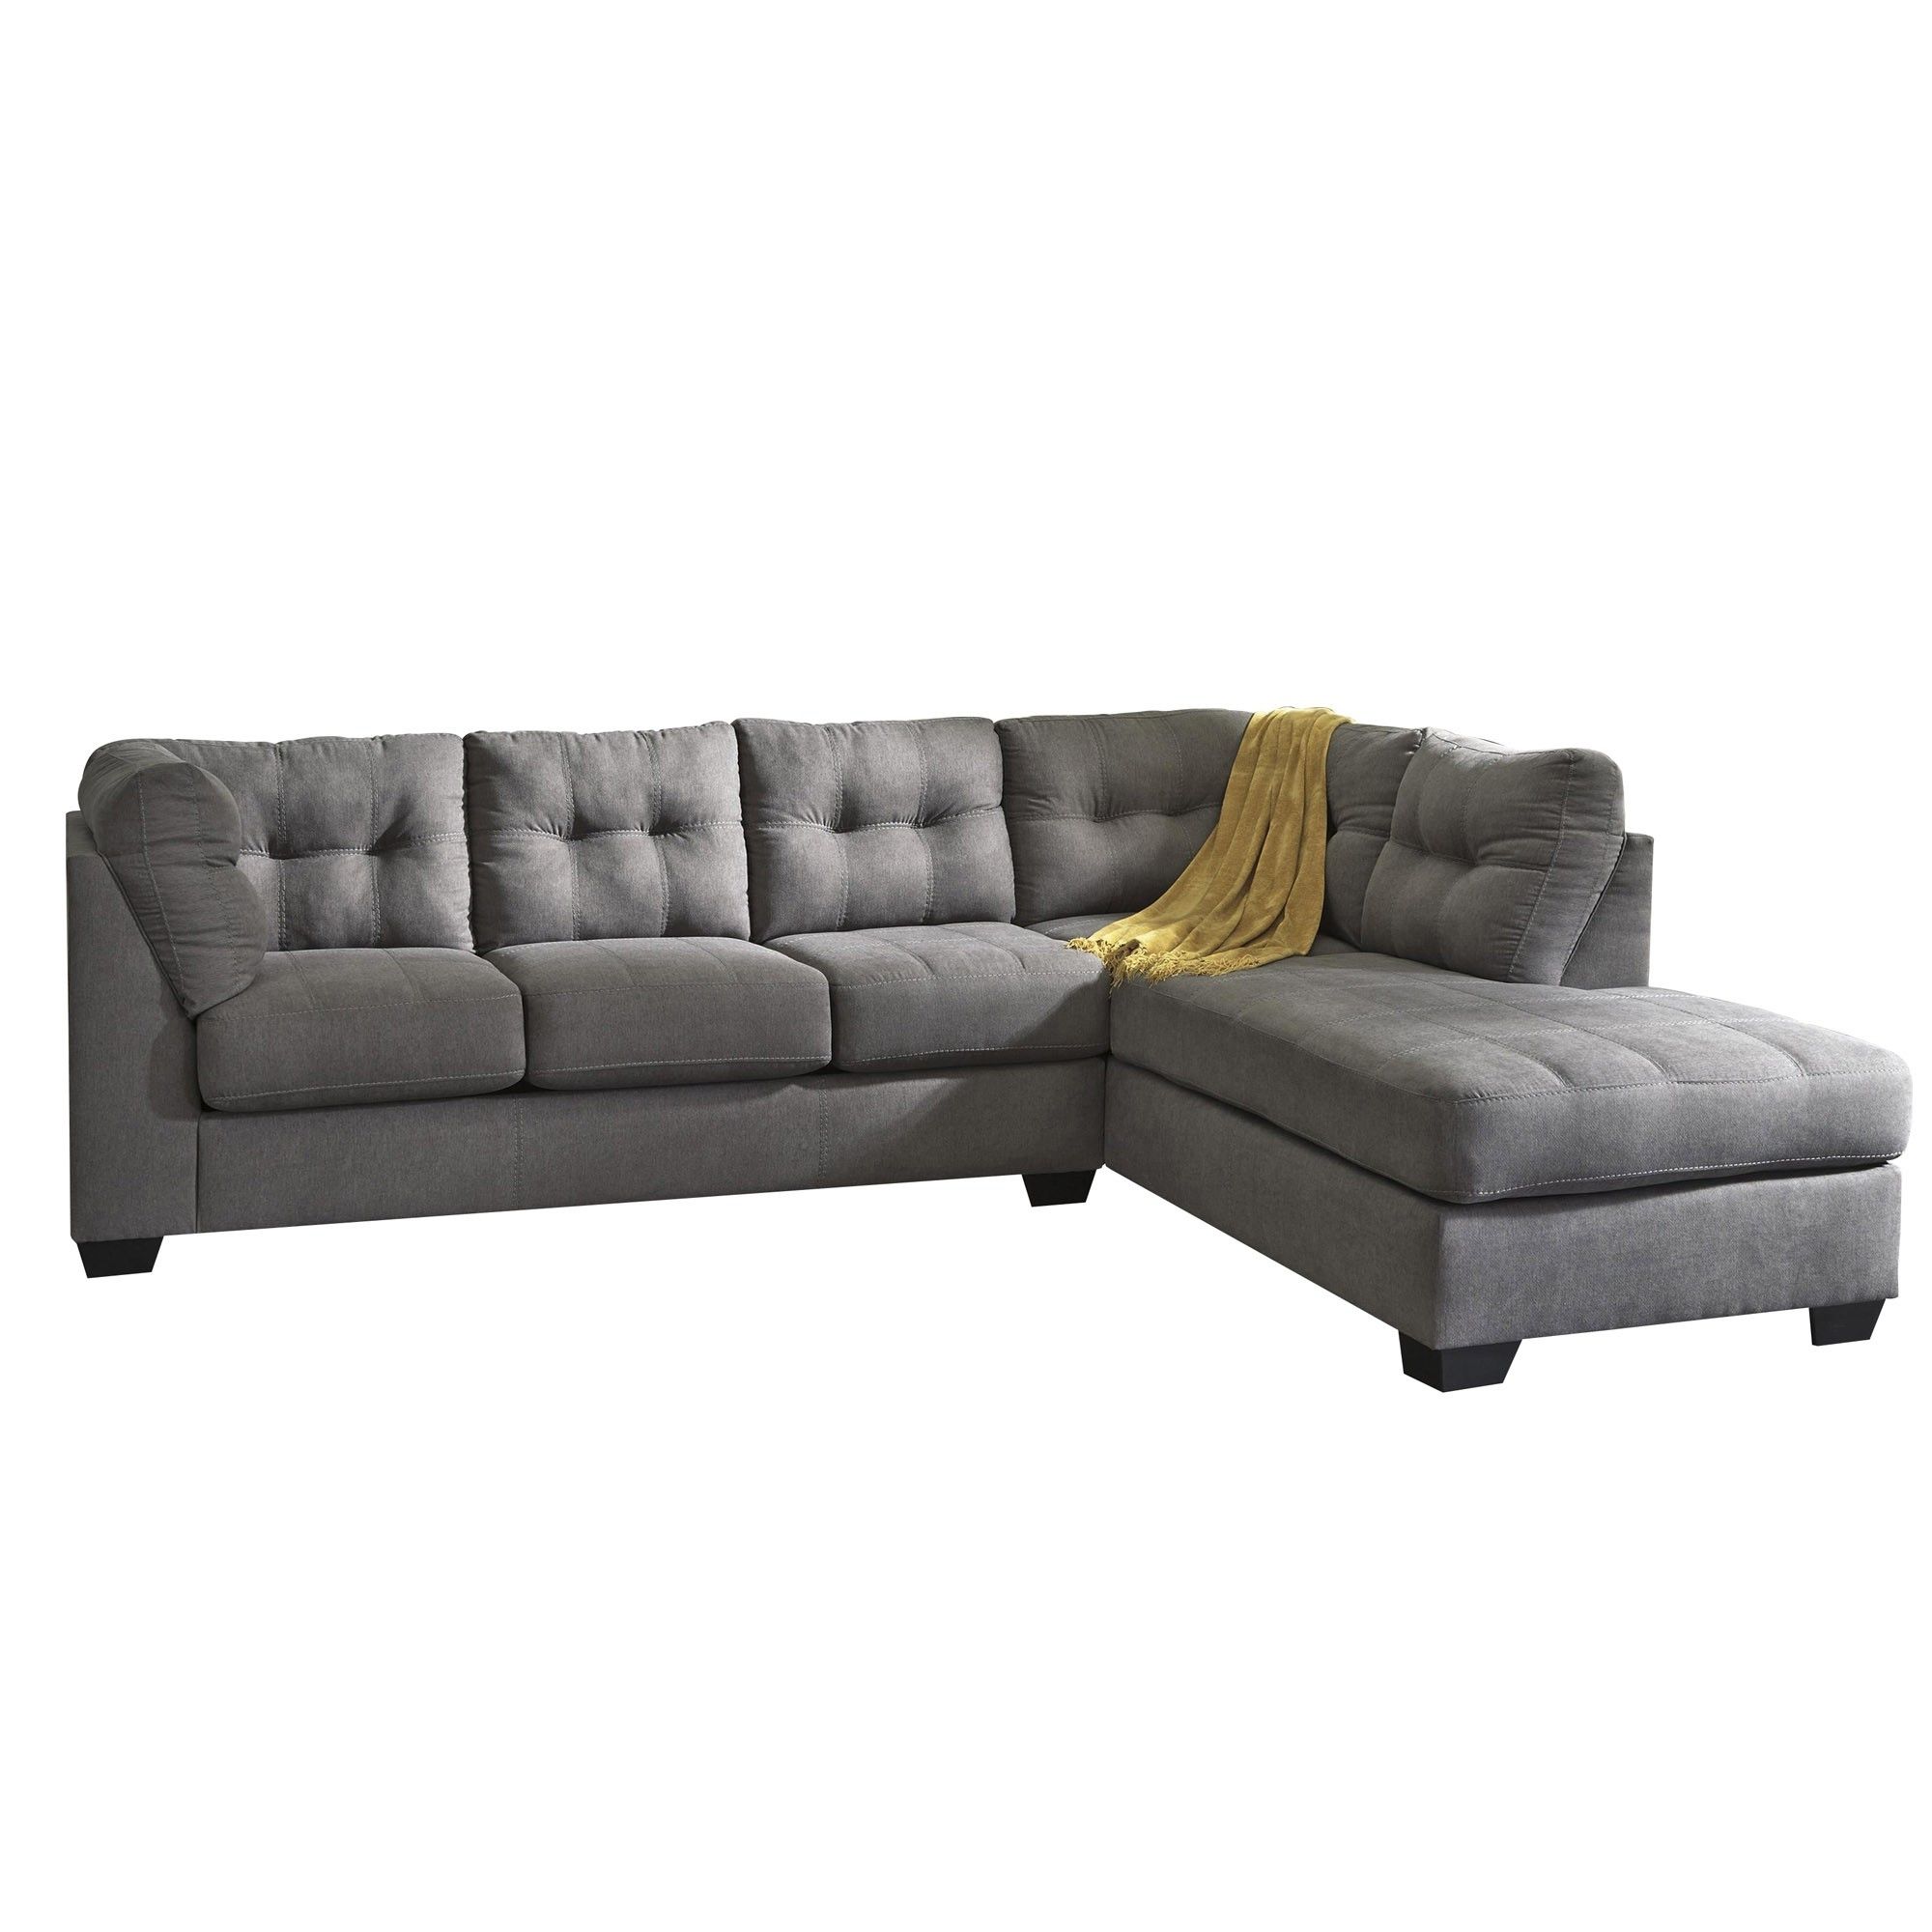 Sectionals | Tepperman's Within Teppermans Sectional Sofas (View 5 of 10)